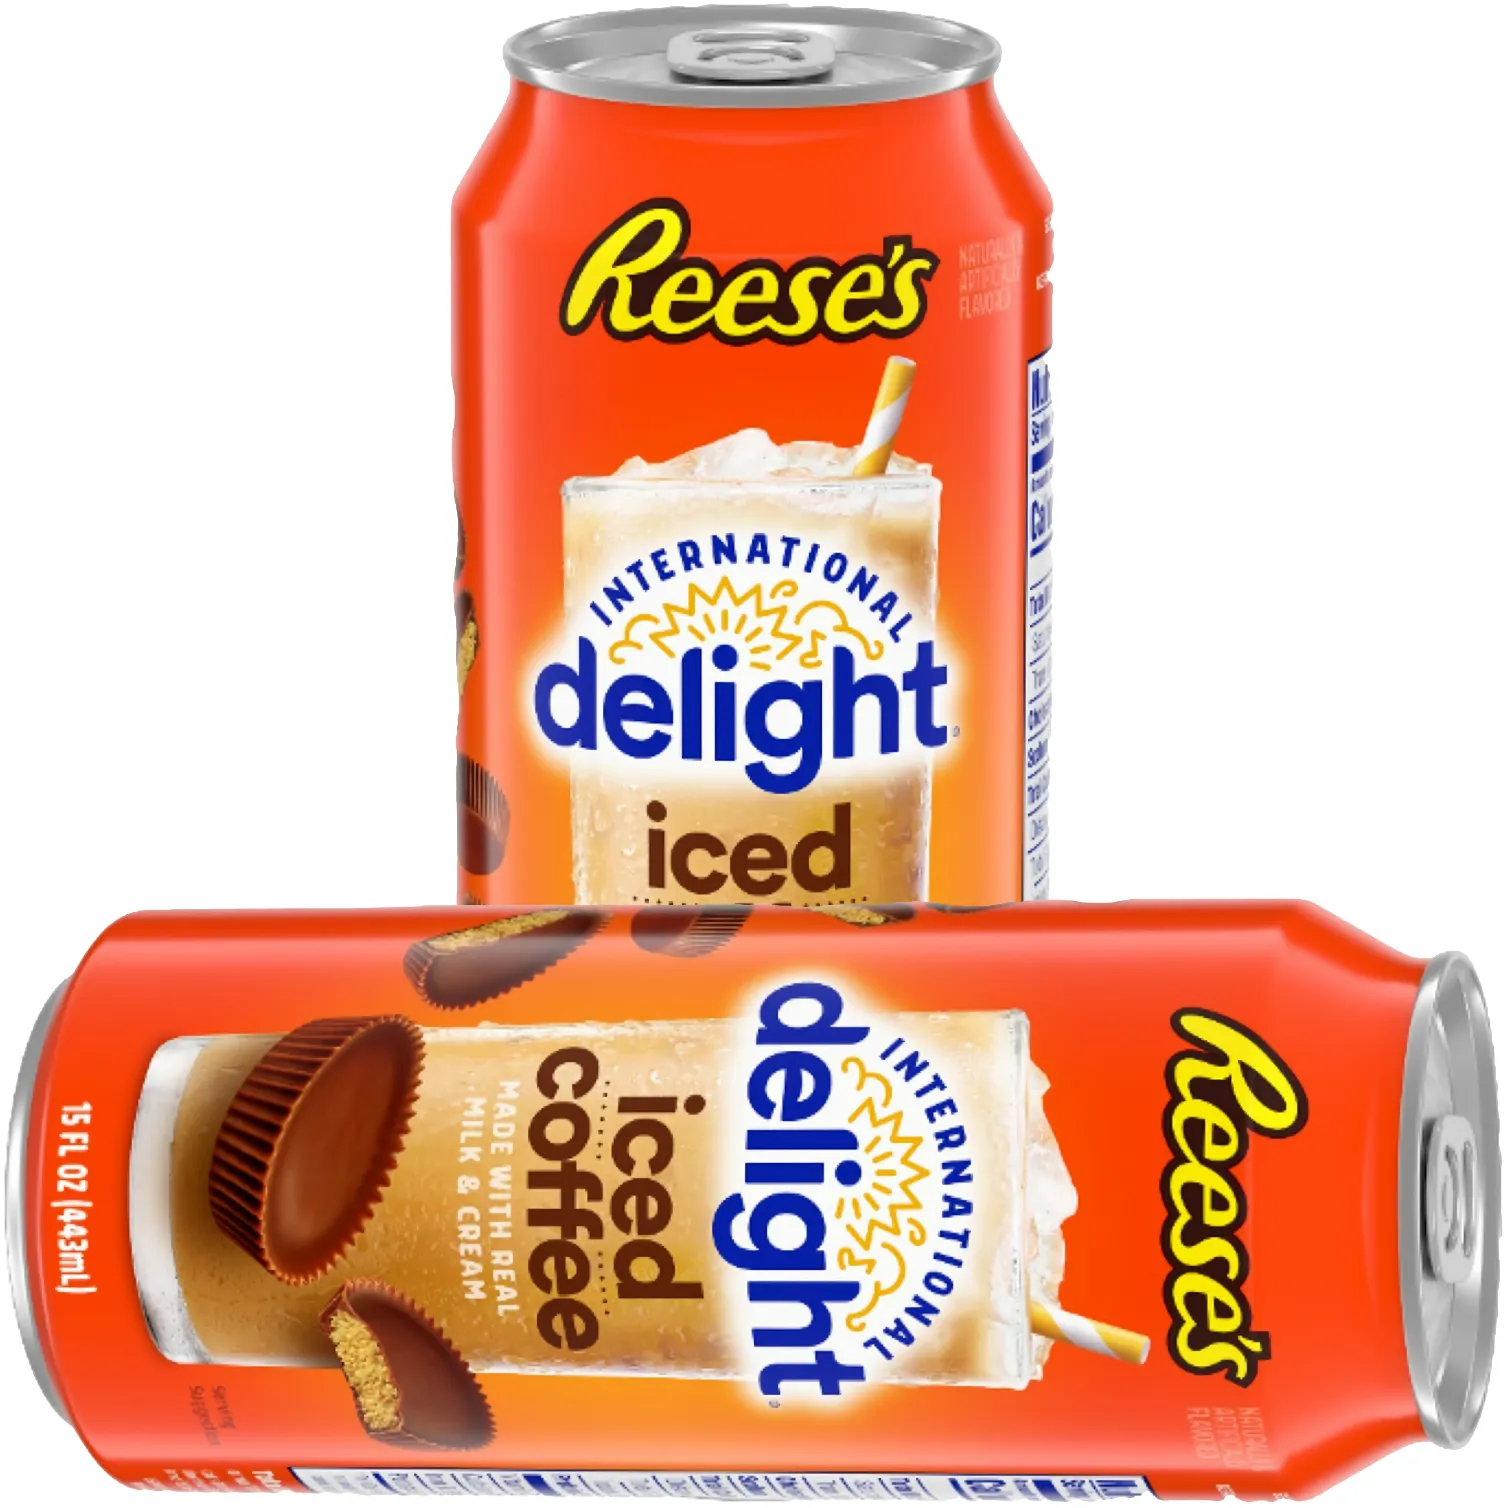 Free International Delight Reese’s Iced Coffee